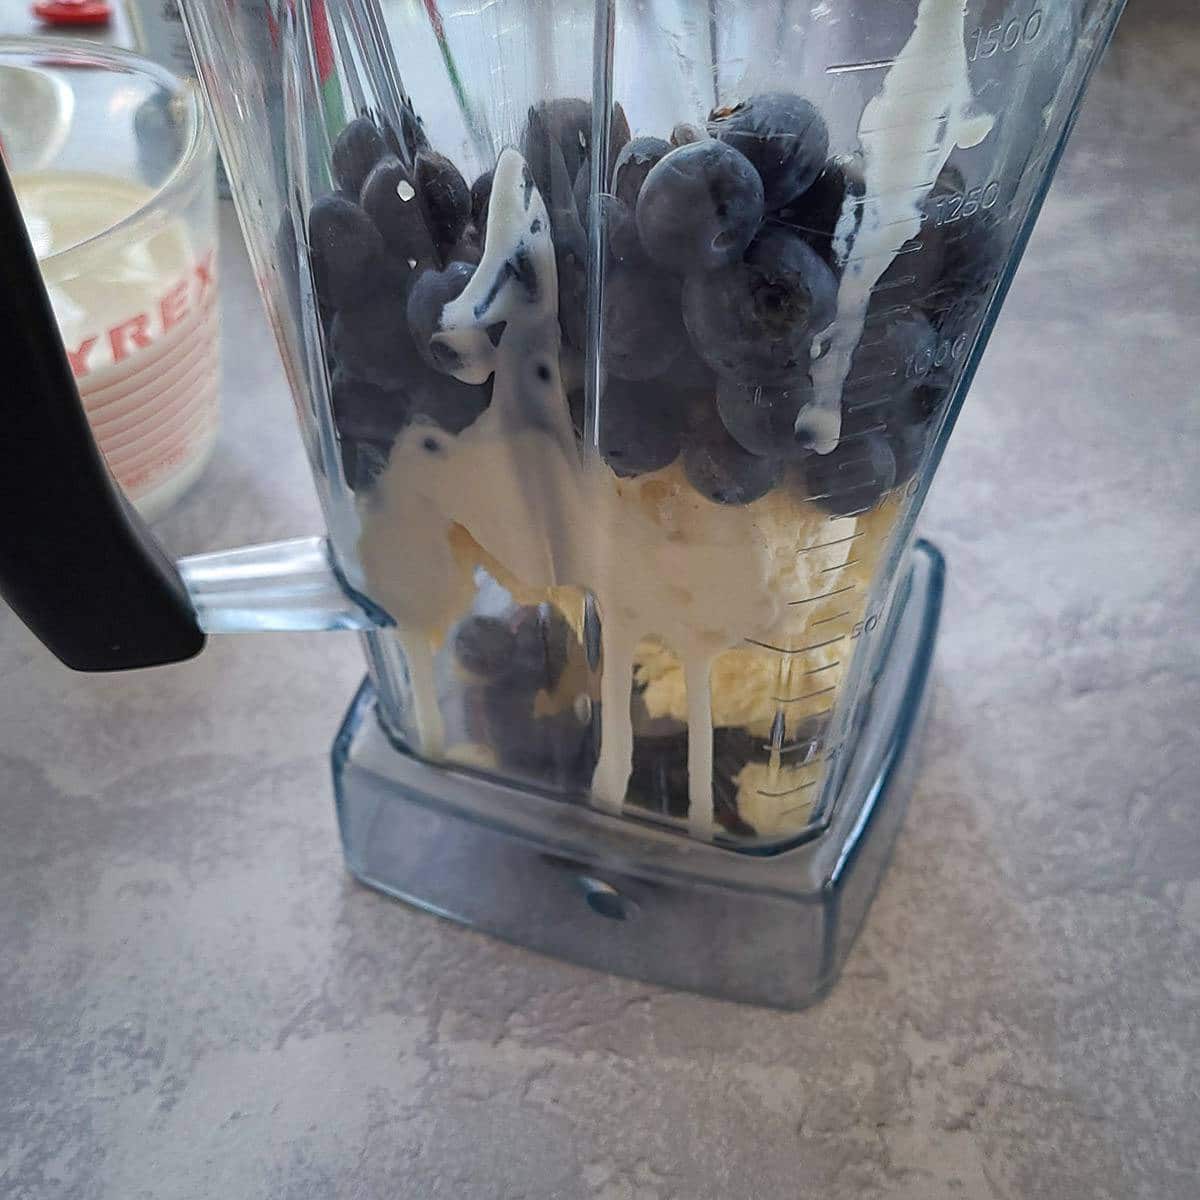 vanilla ice cream and blueberries in a blender